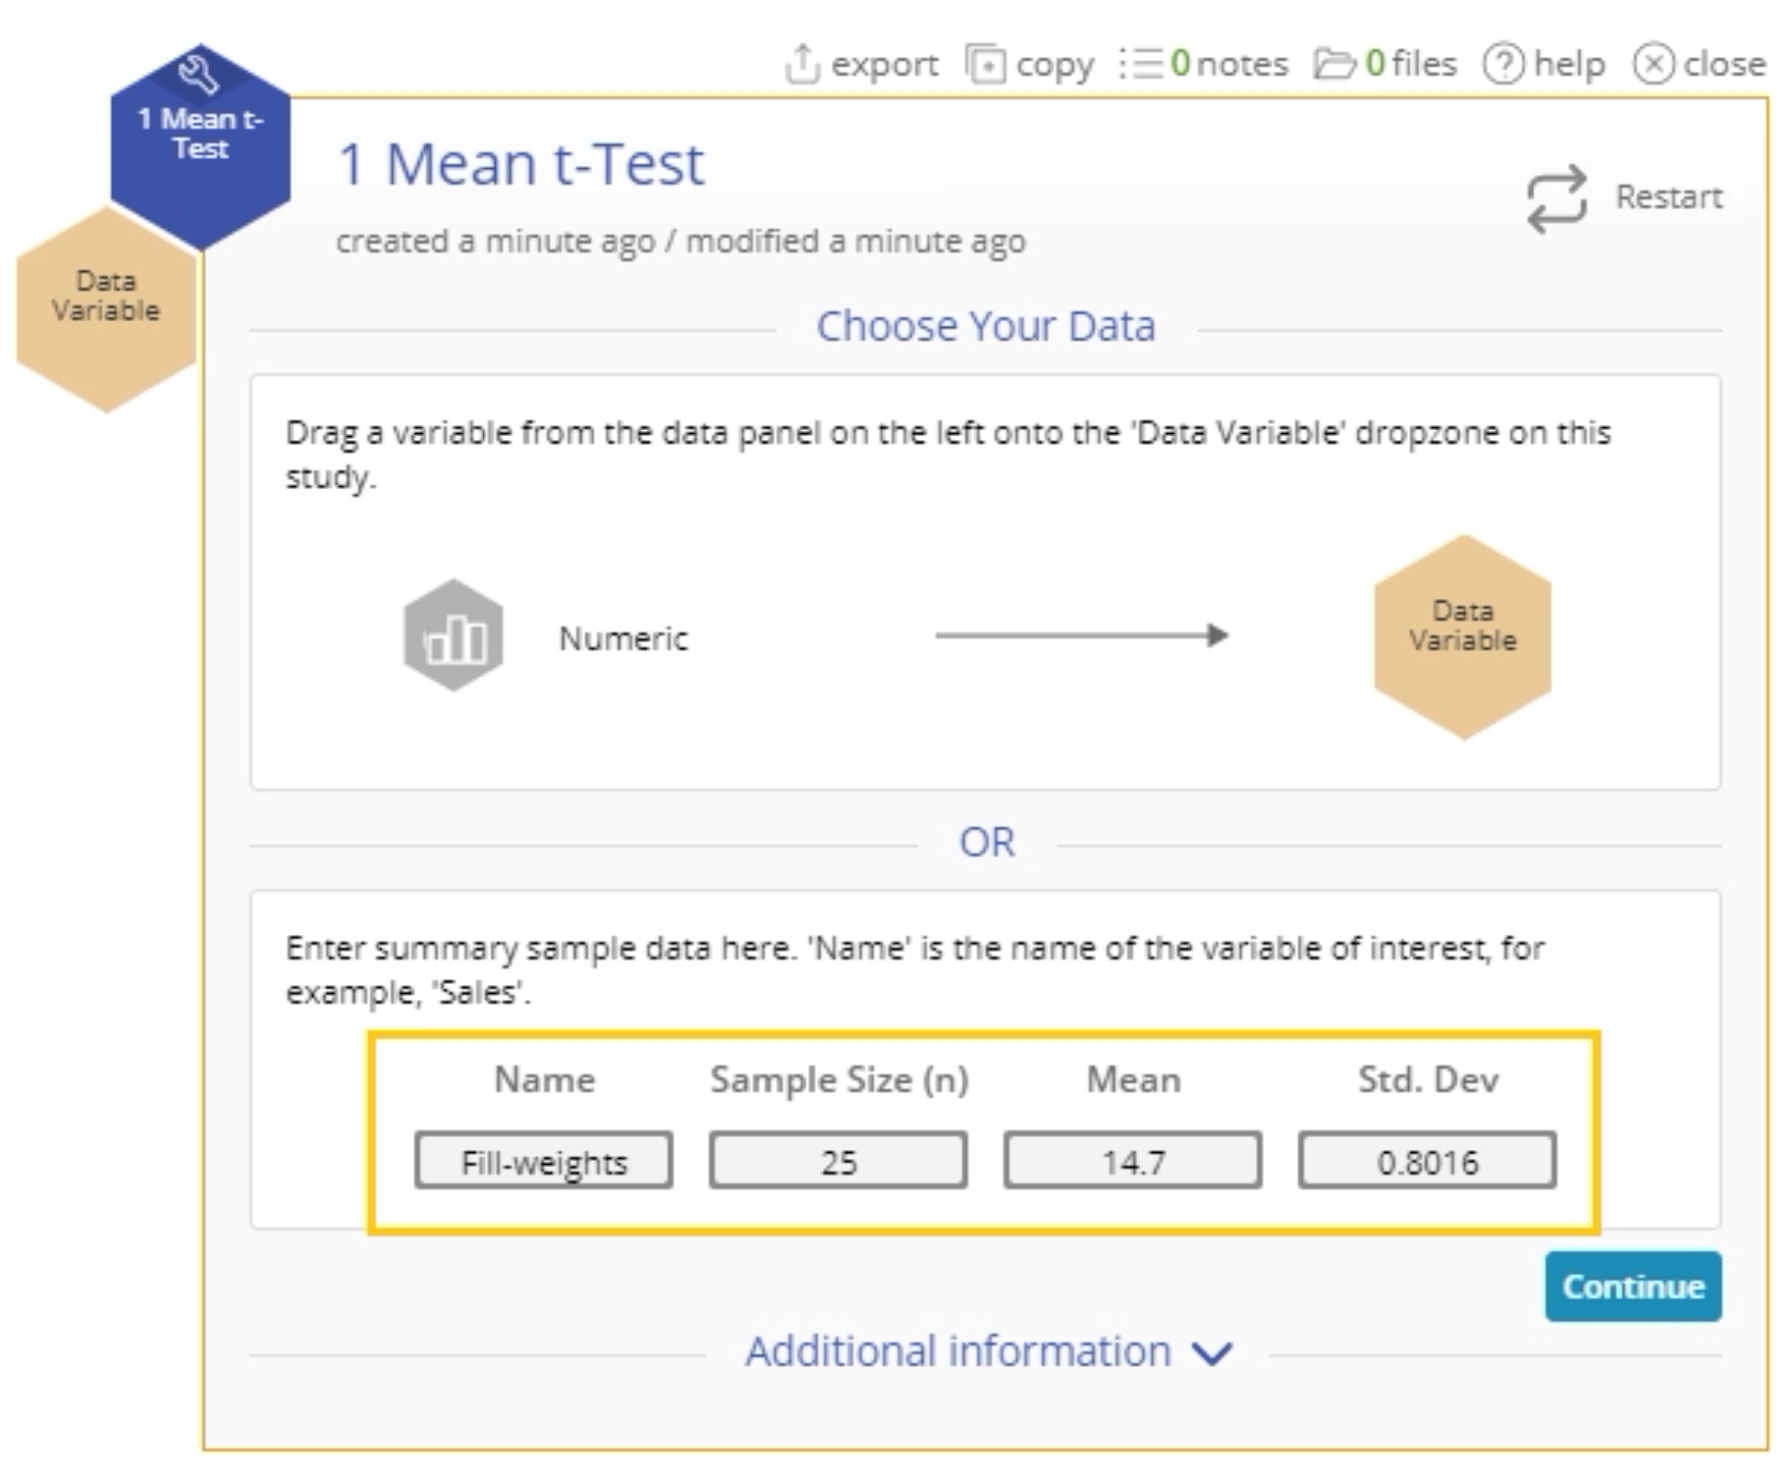 1 mean t-Test menu with summary sample data highlighted.